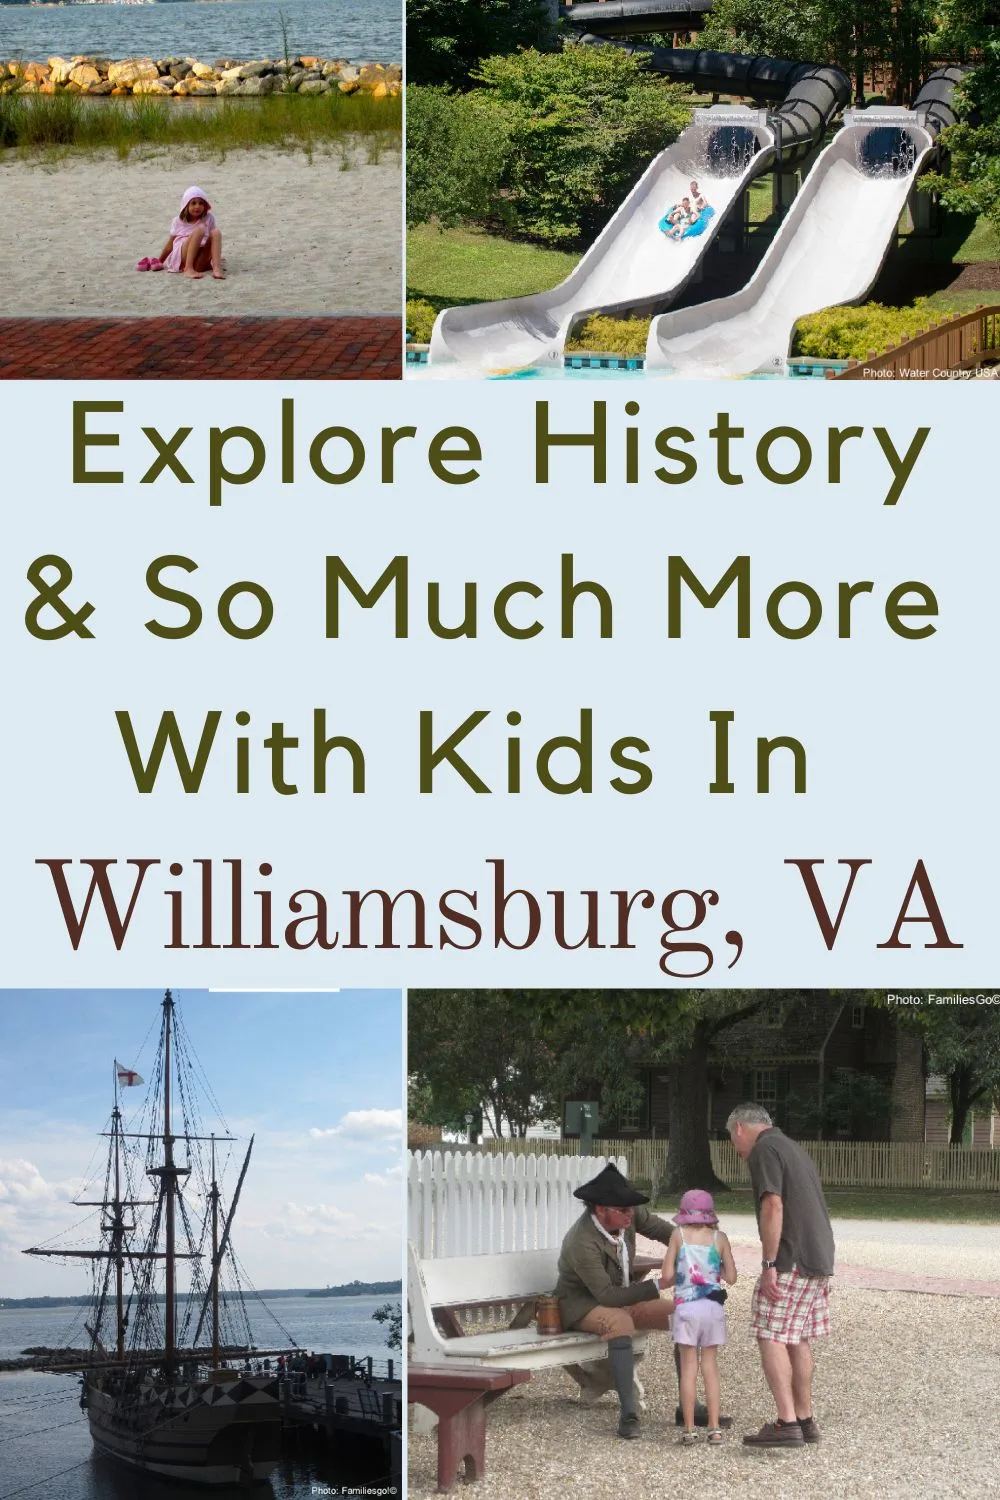 here are 8 awesome things to do with kids in williamsburg, va including the historic sites, restaurants a family-friendly resort and more.